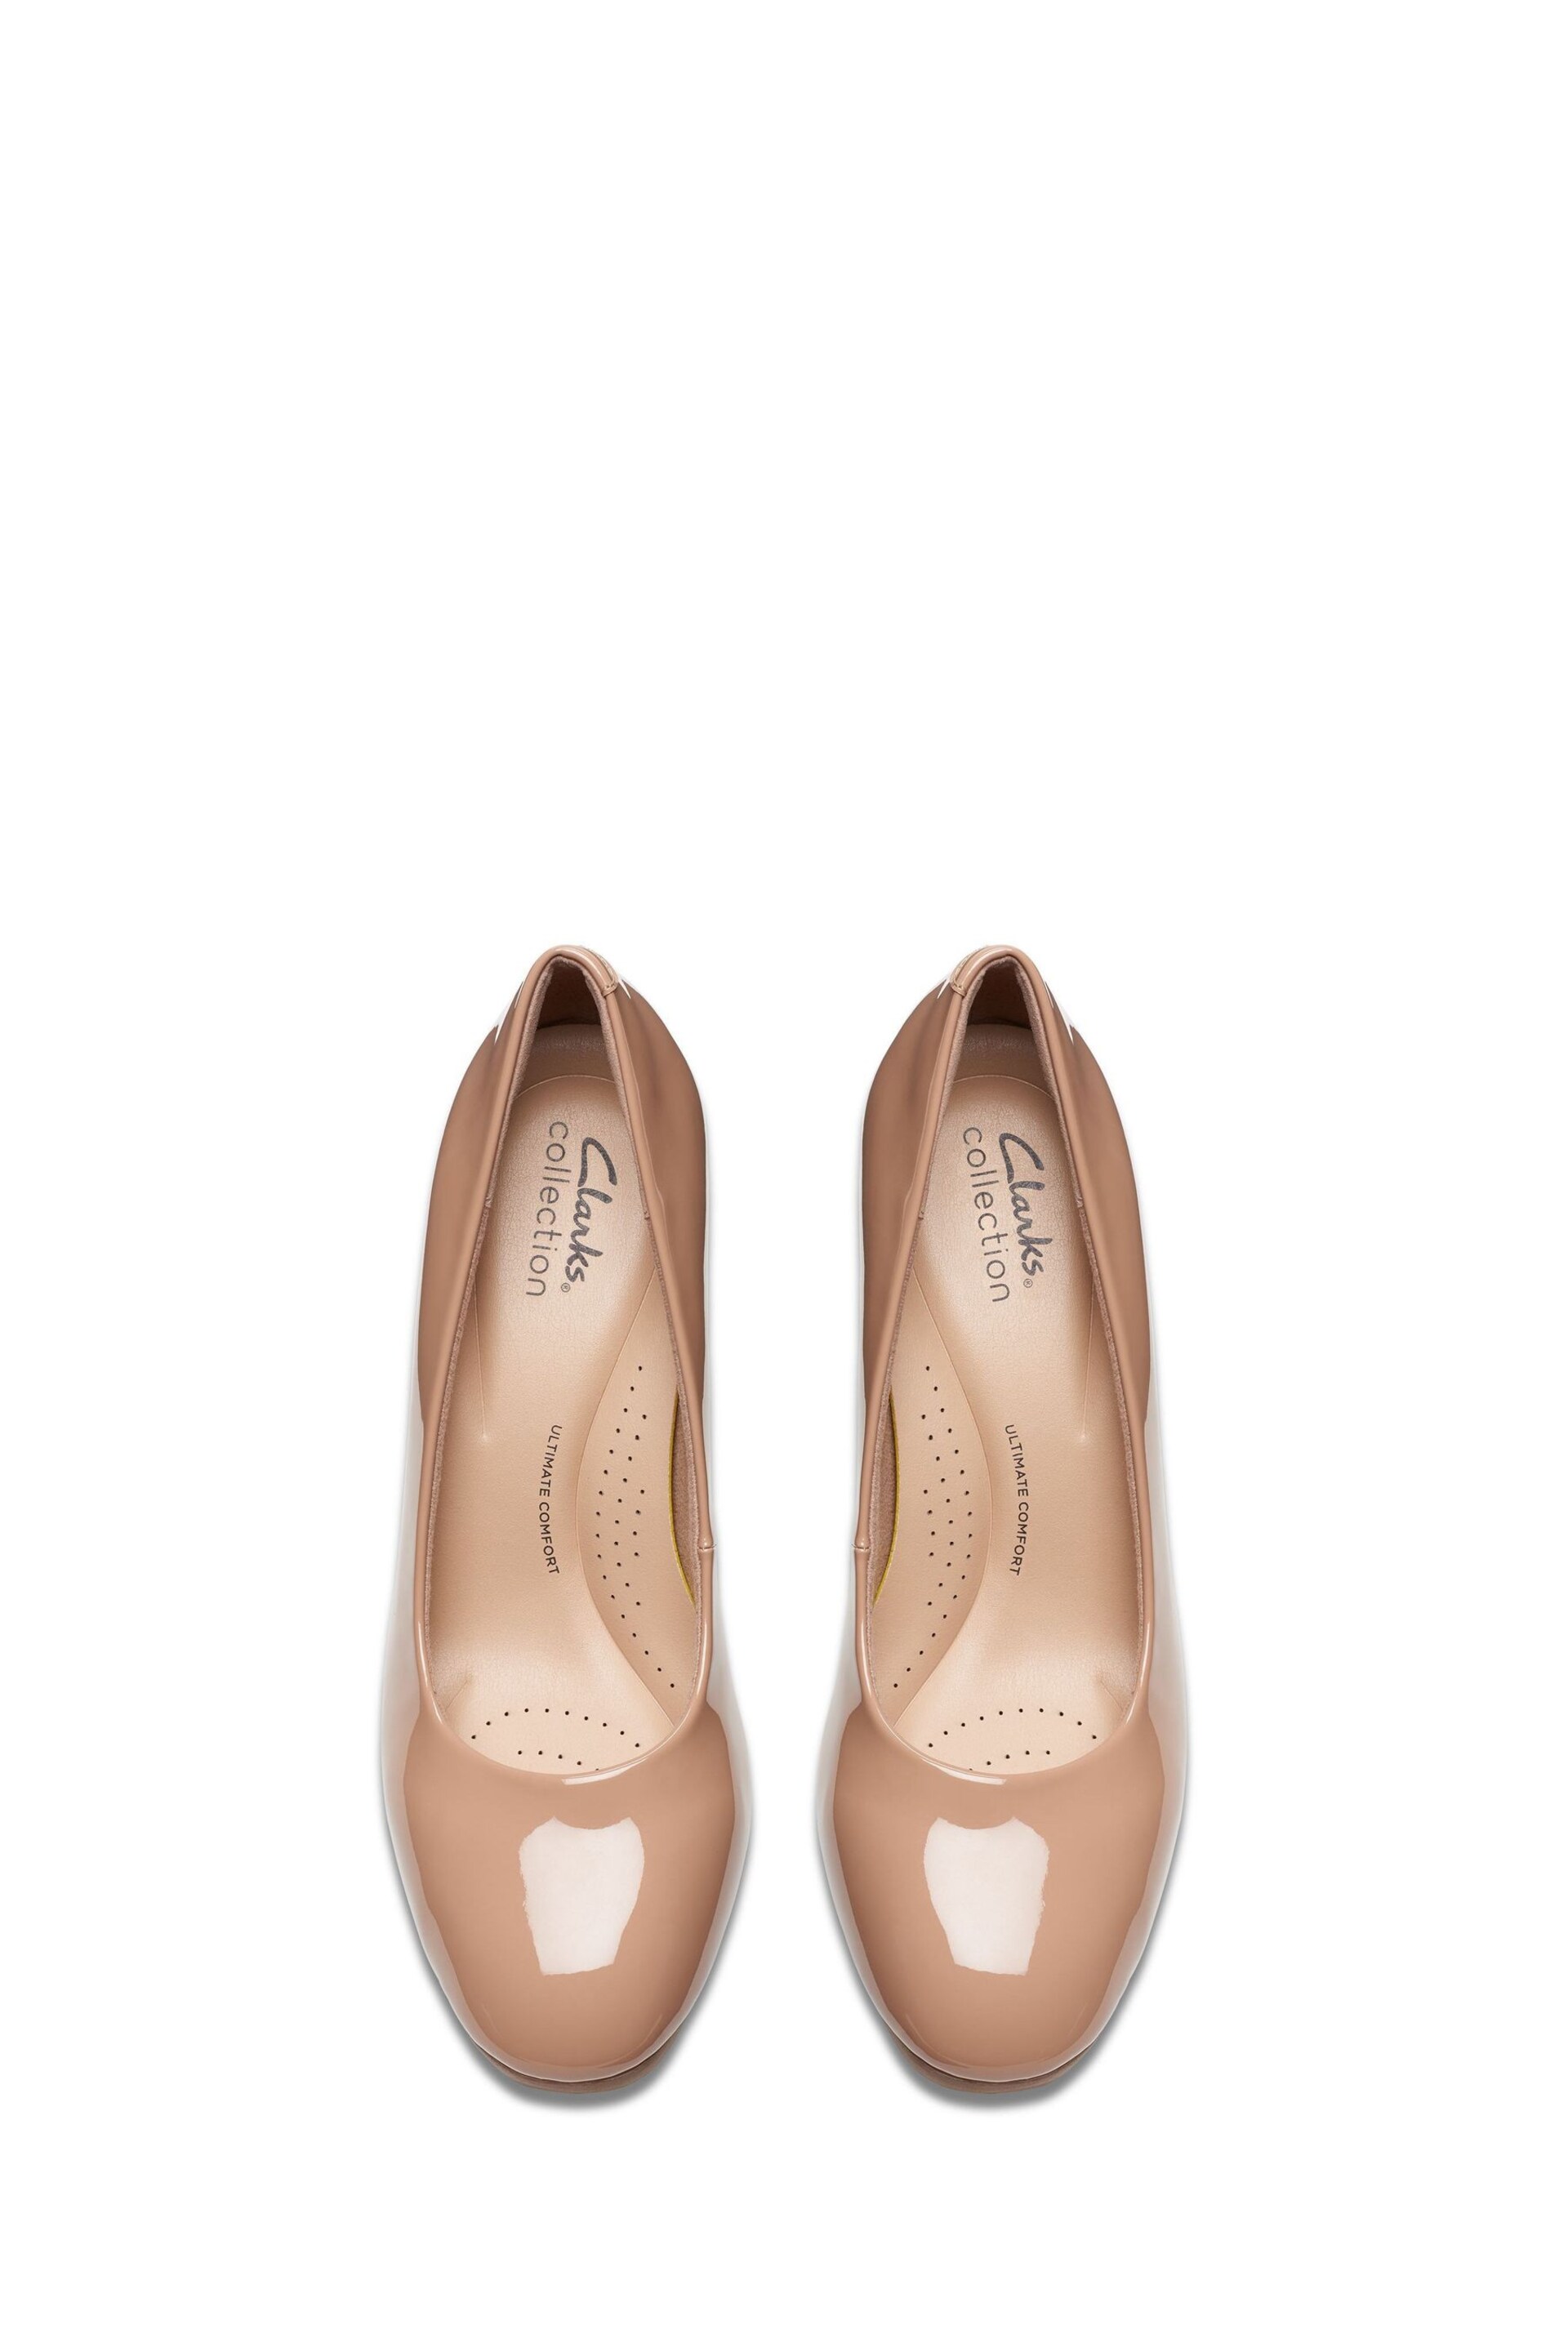 Clarks Nude Praline Patent Ambyr 2 Braley Shoes - Image 5 of 7